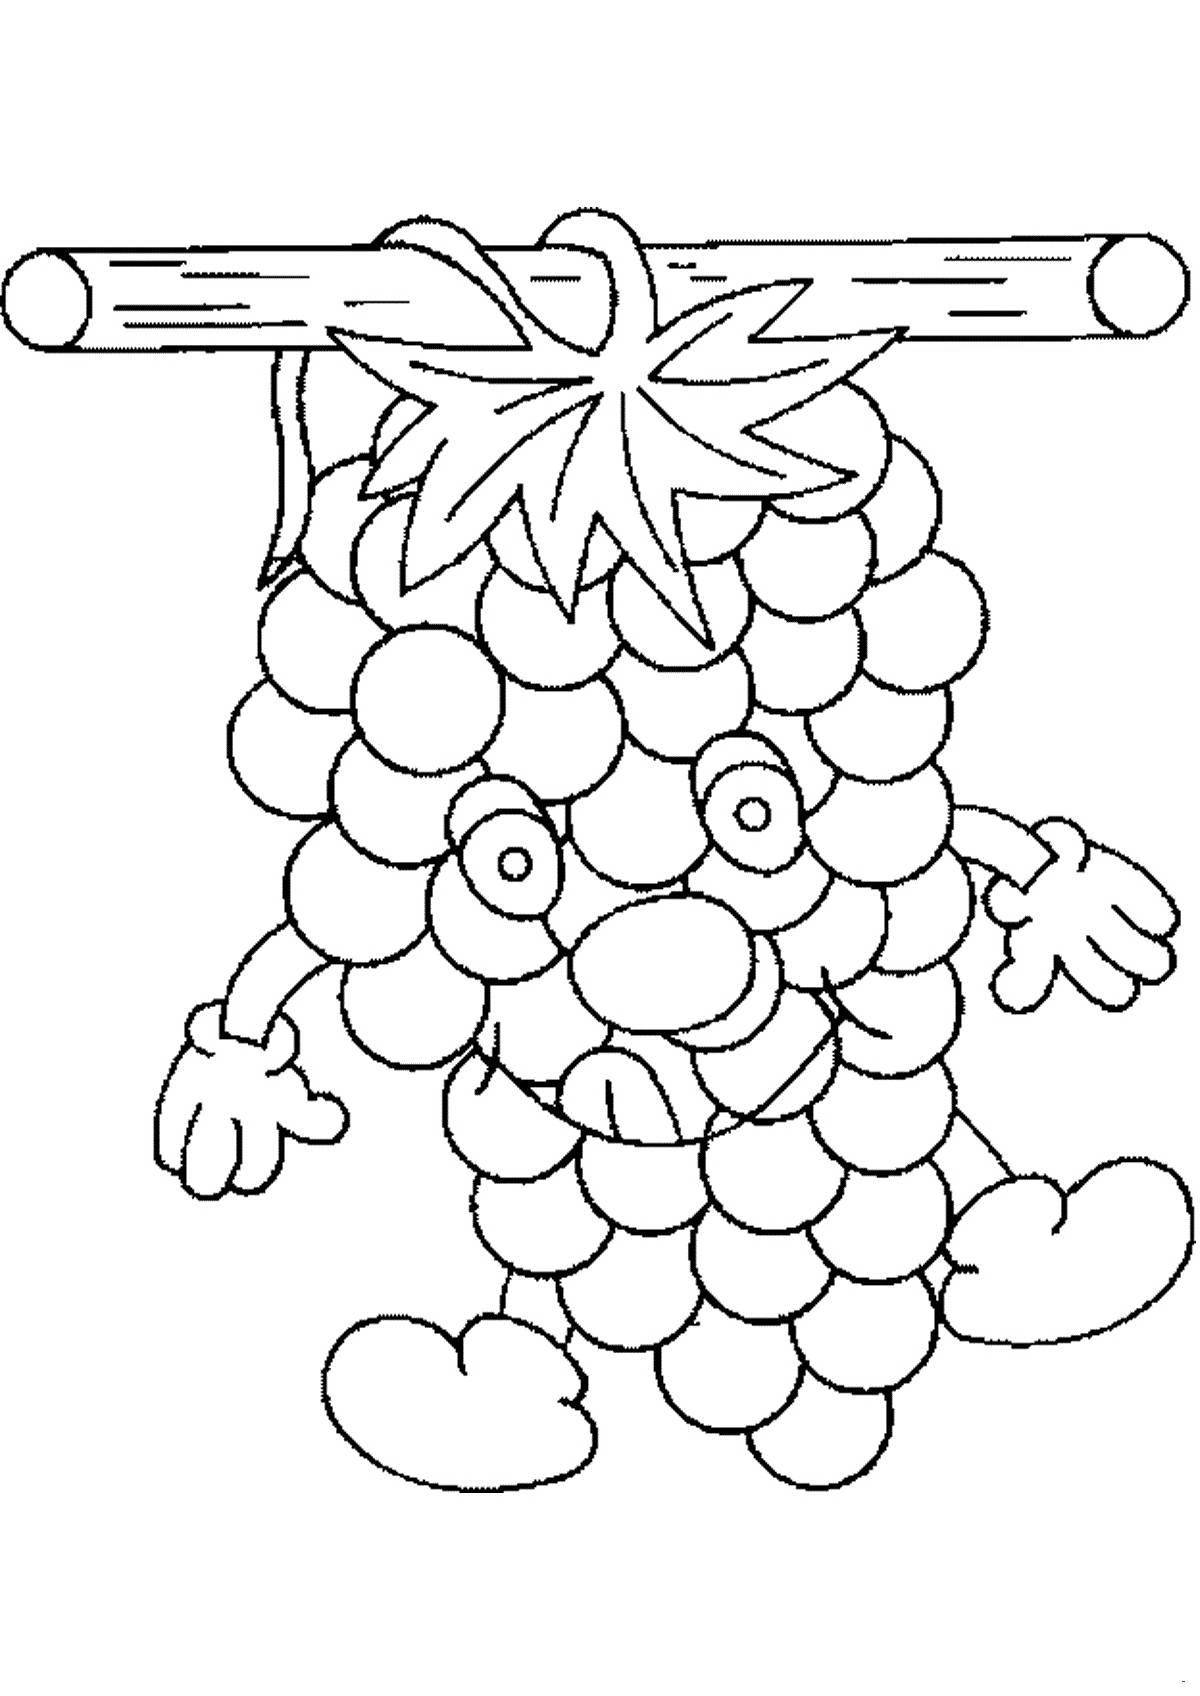 Gorgeous grapes coloring book for 3-4 year olds